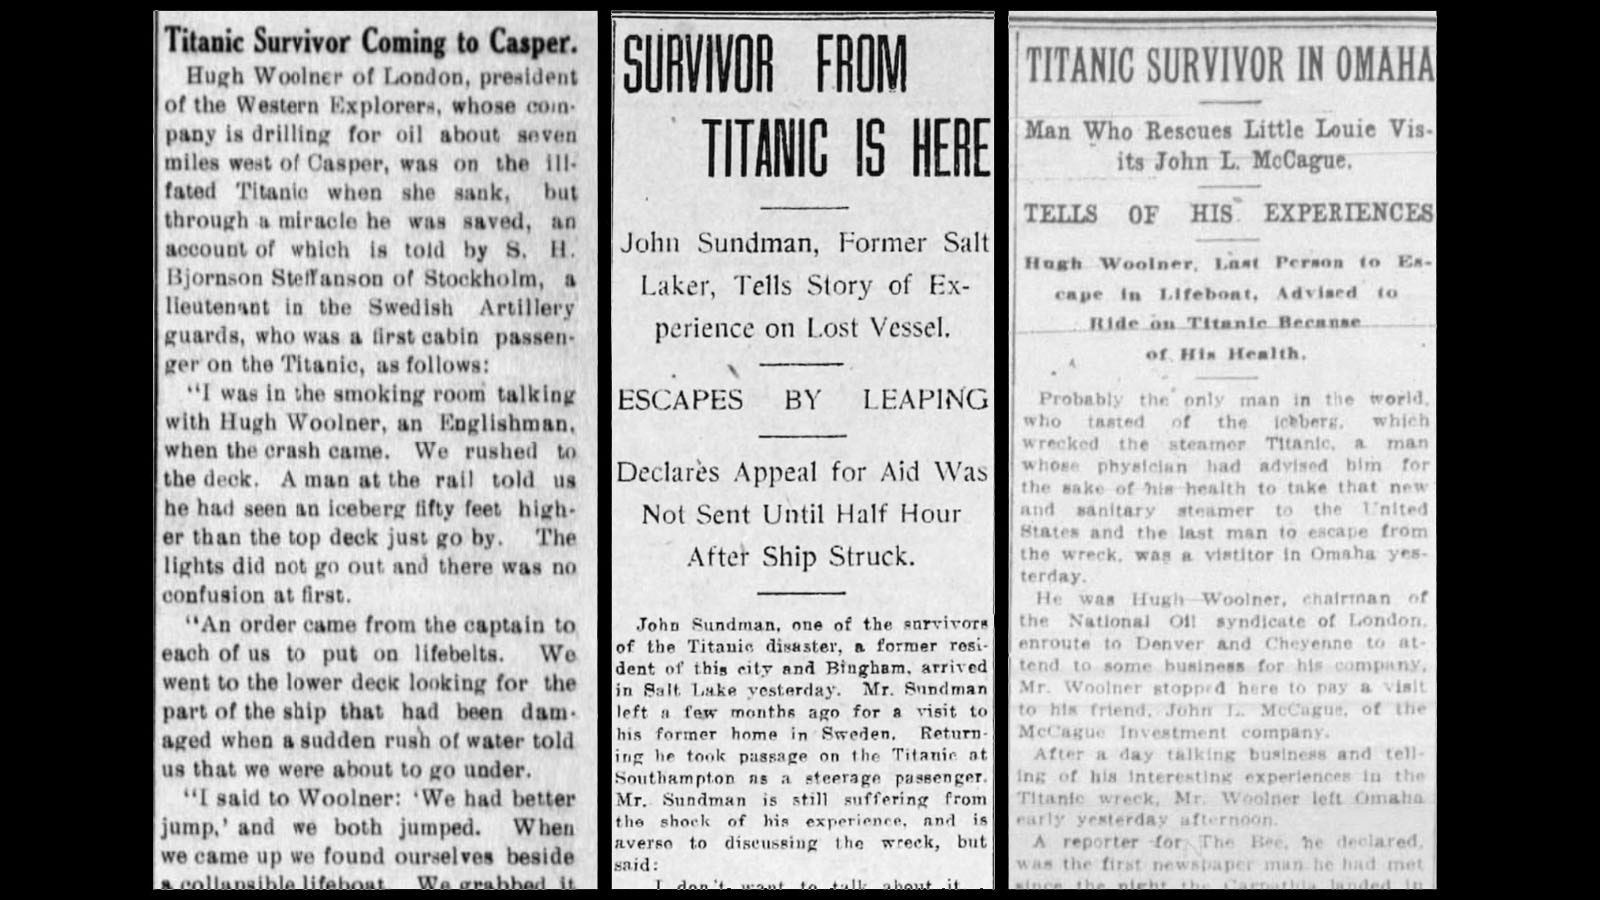 Left, The Natrona County Tribune reported on April 24, 1912 that Titanic survivor Hugh Woolner was headed to Casper to check on his investment; Center, A Finnish man initially headed to Cheyenne to see a friend, told his story of survival to the Salt Lake Tribune on April 8, 1912; Right, London-based Hugh Woolner was headed to Casper on the Titanic when it went down. He shared his story with the Omaha Evening Bee on May 15, 1912.